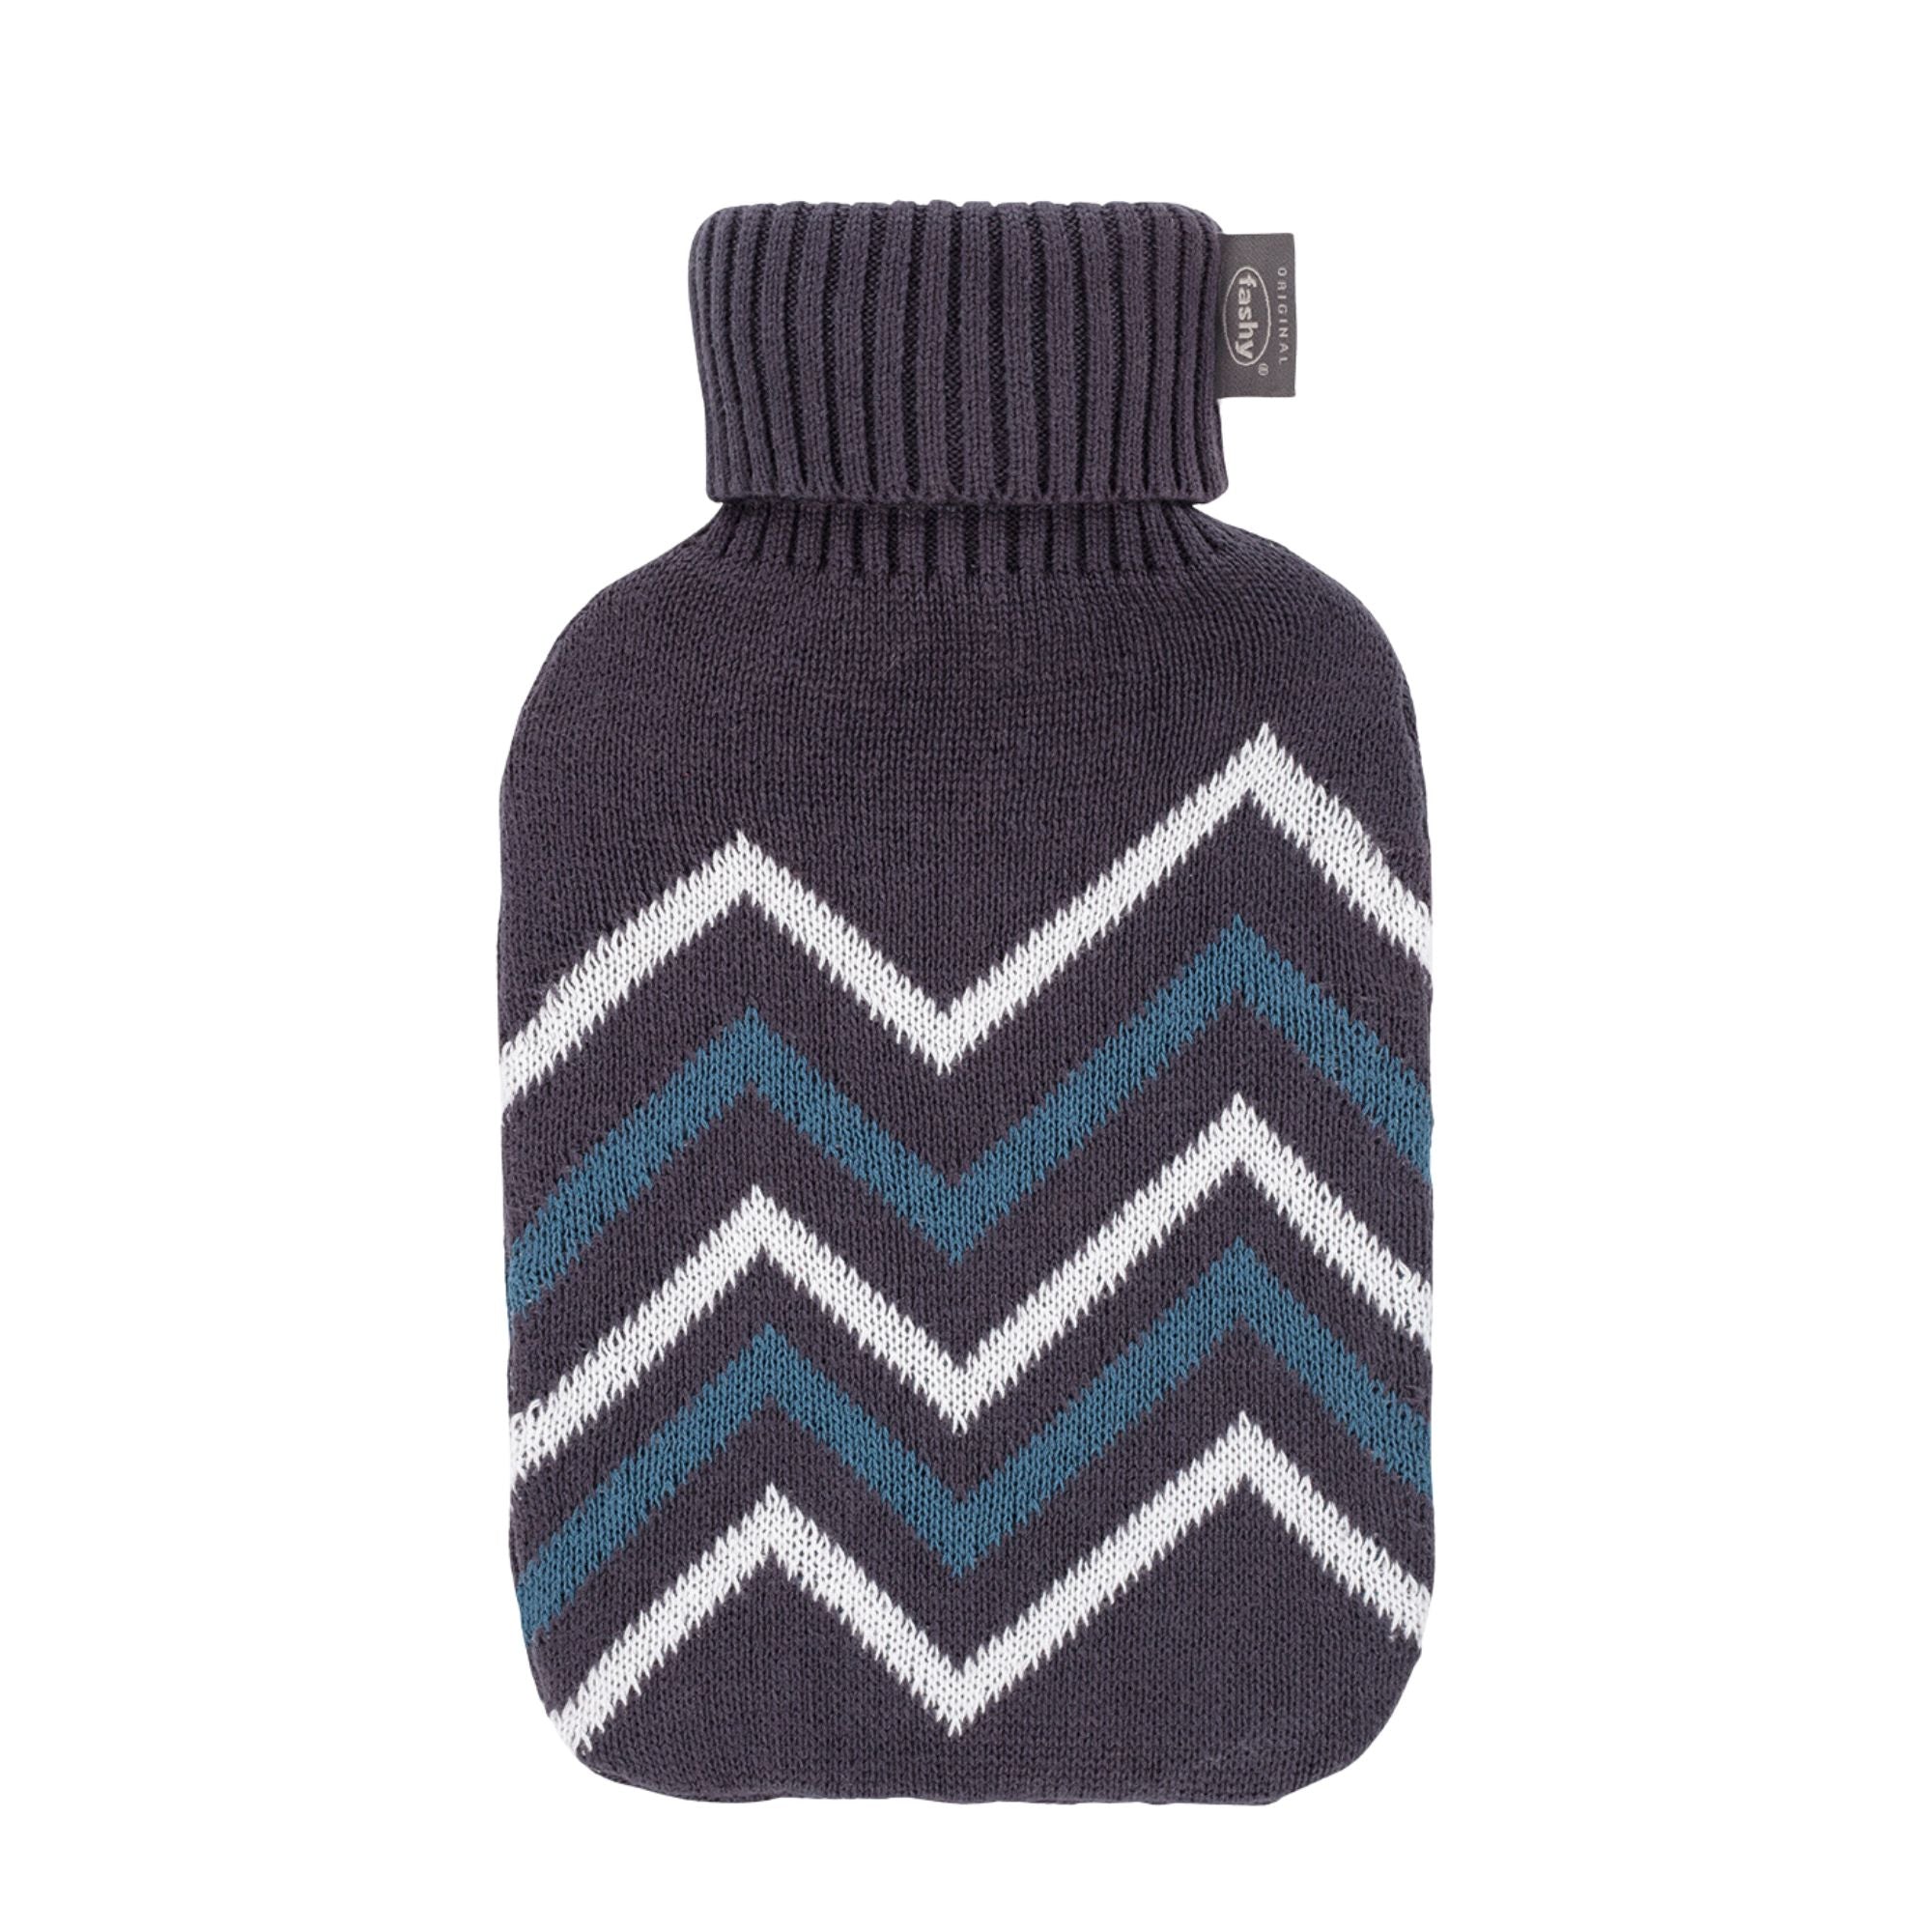 2 Litre Fashy Hot Water Bottle with Zig Zag Knitted Cotton Cover